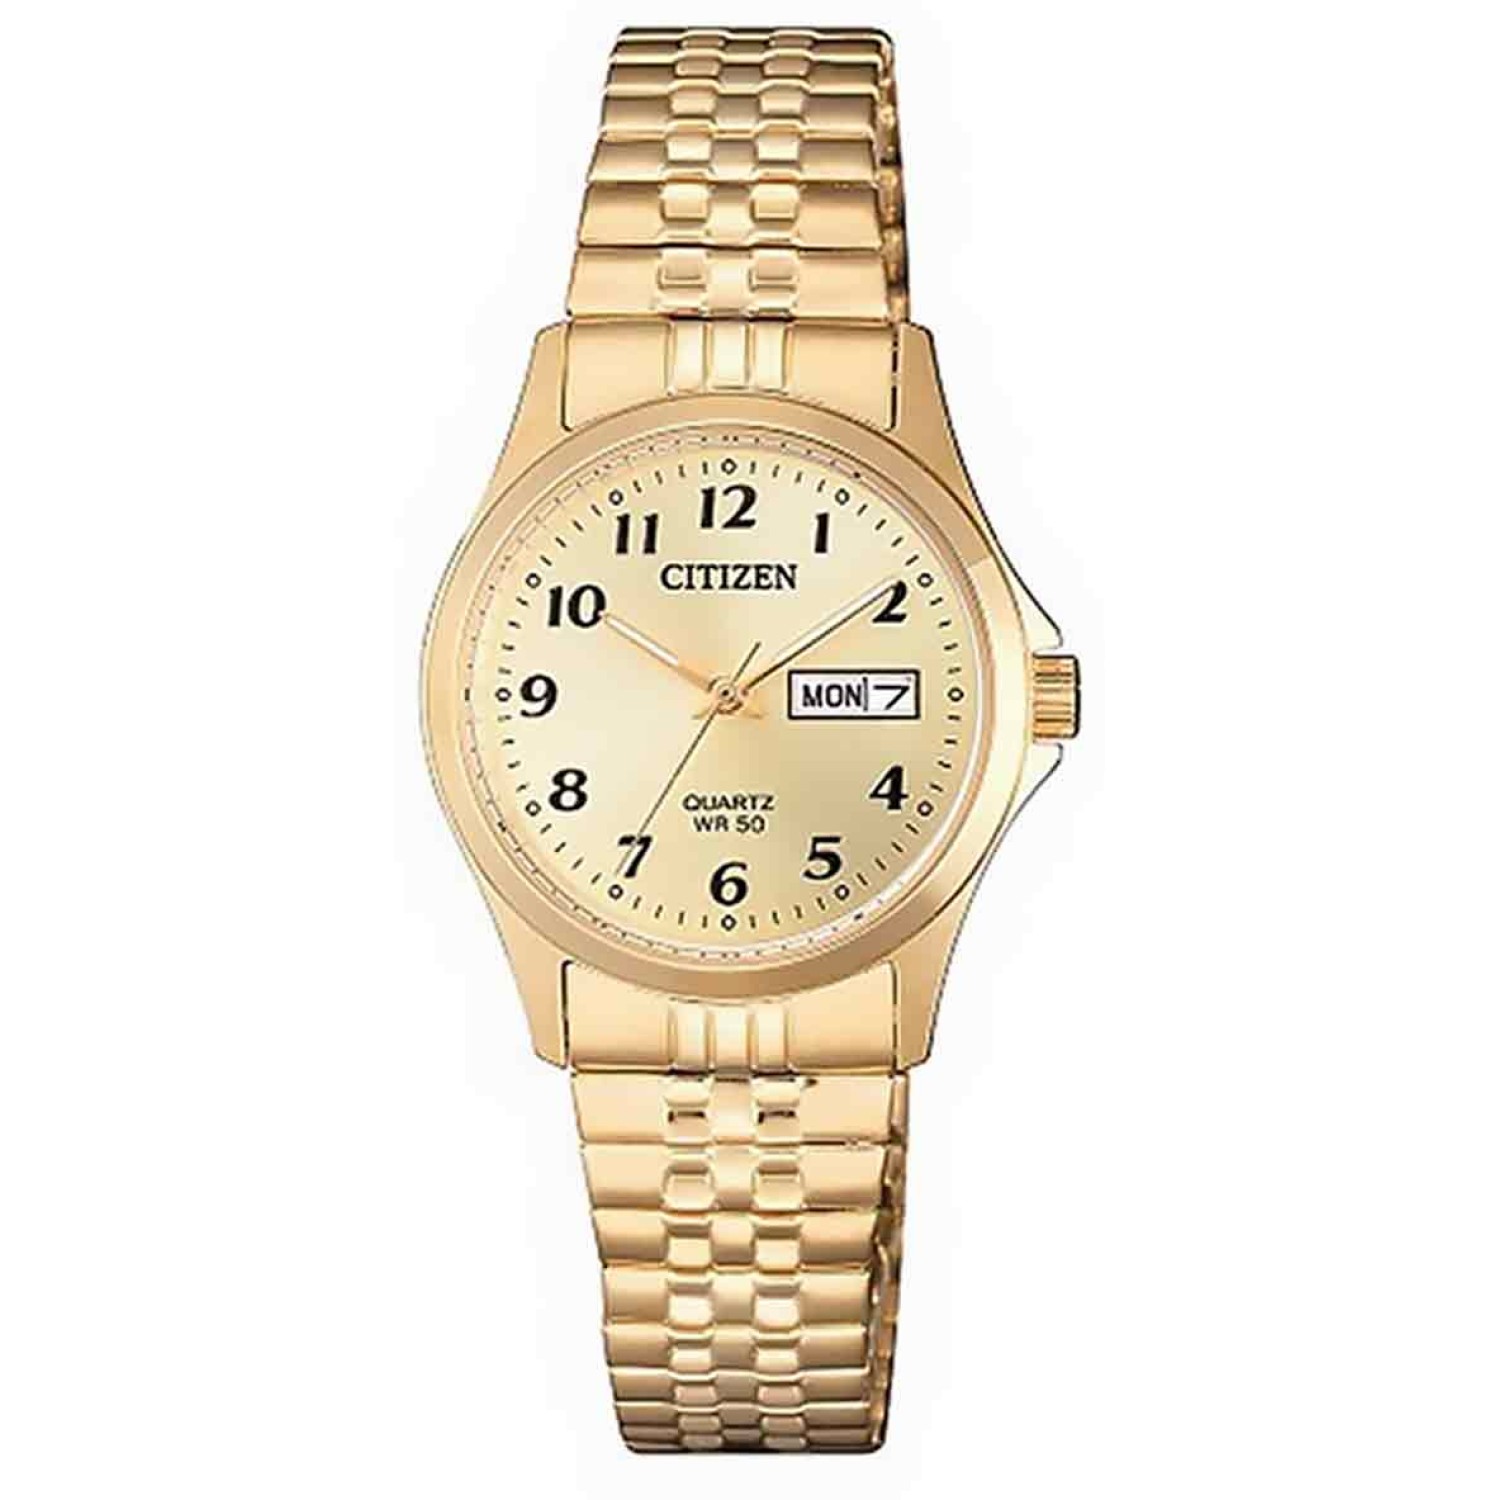 EQ2002-91P Citizen Ladies Watch. The gold tones of the case, bezel and band are accentuated by the unique yet refined matte gold face, creating a beautiful blend of classic and contemporary styling elements. Constructed from stainless steel with gold pl @